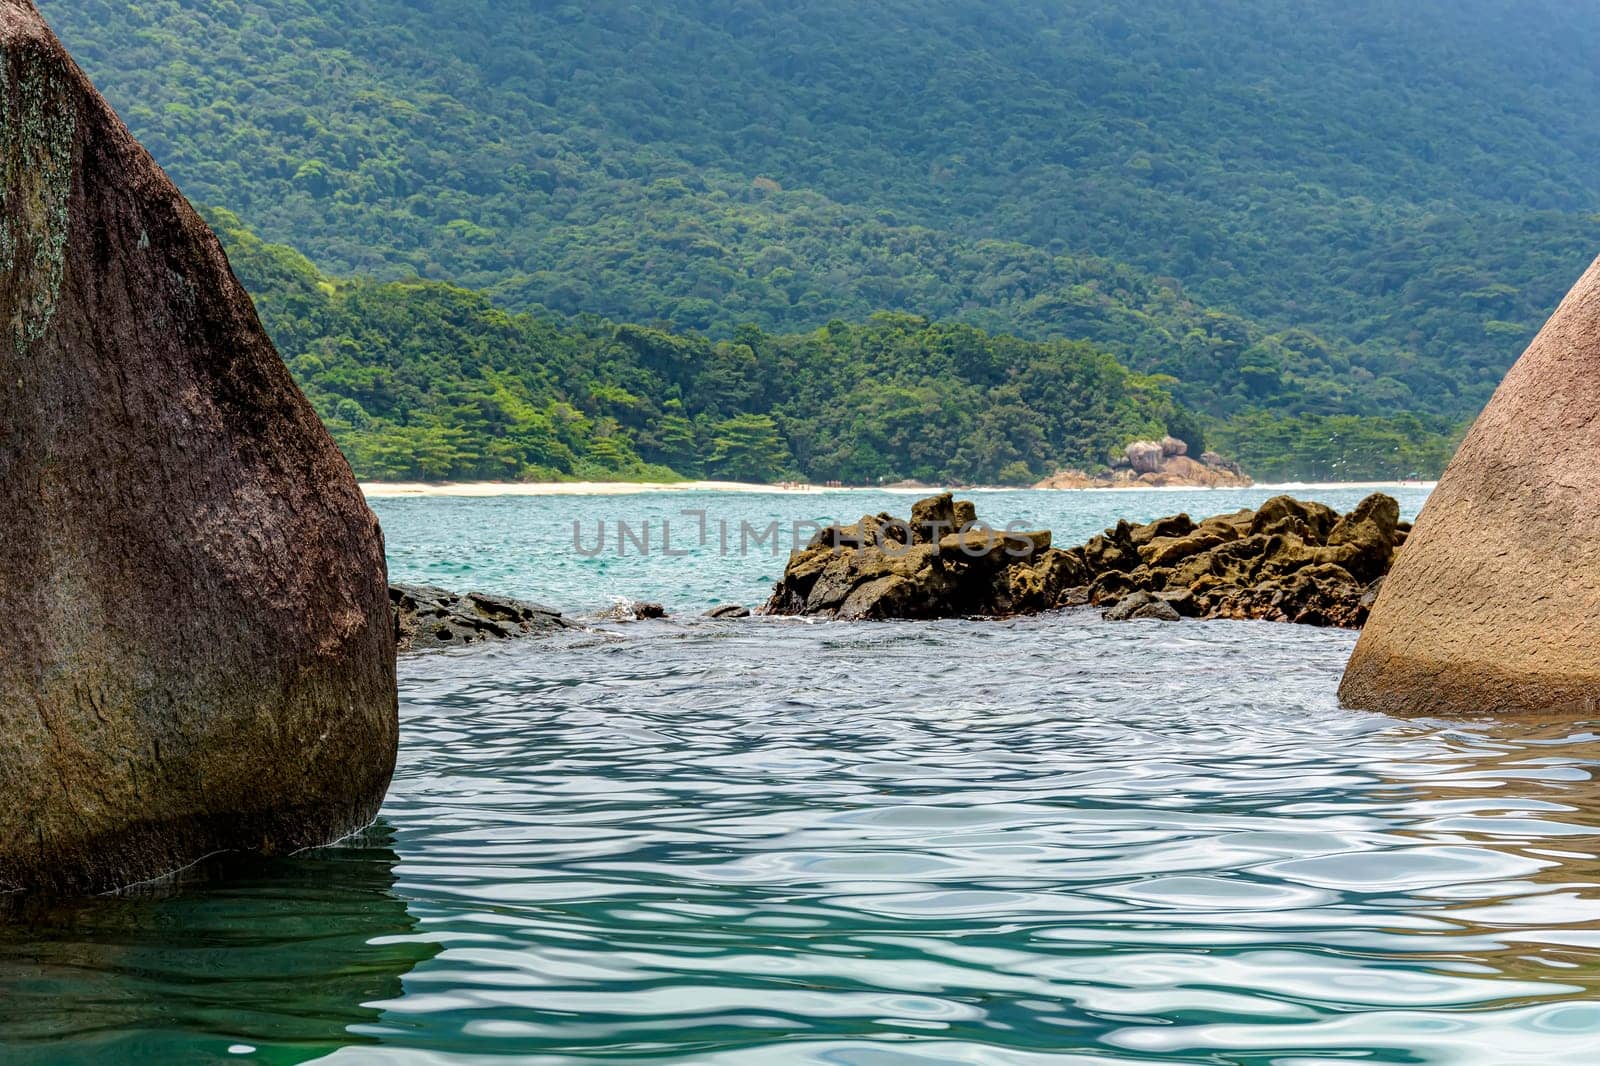 Beach and tropical forest in Trindade, Paraty seen through the rocks